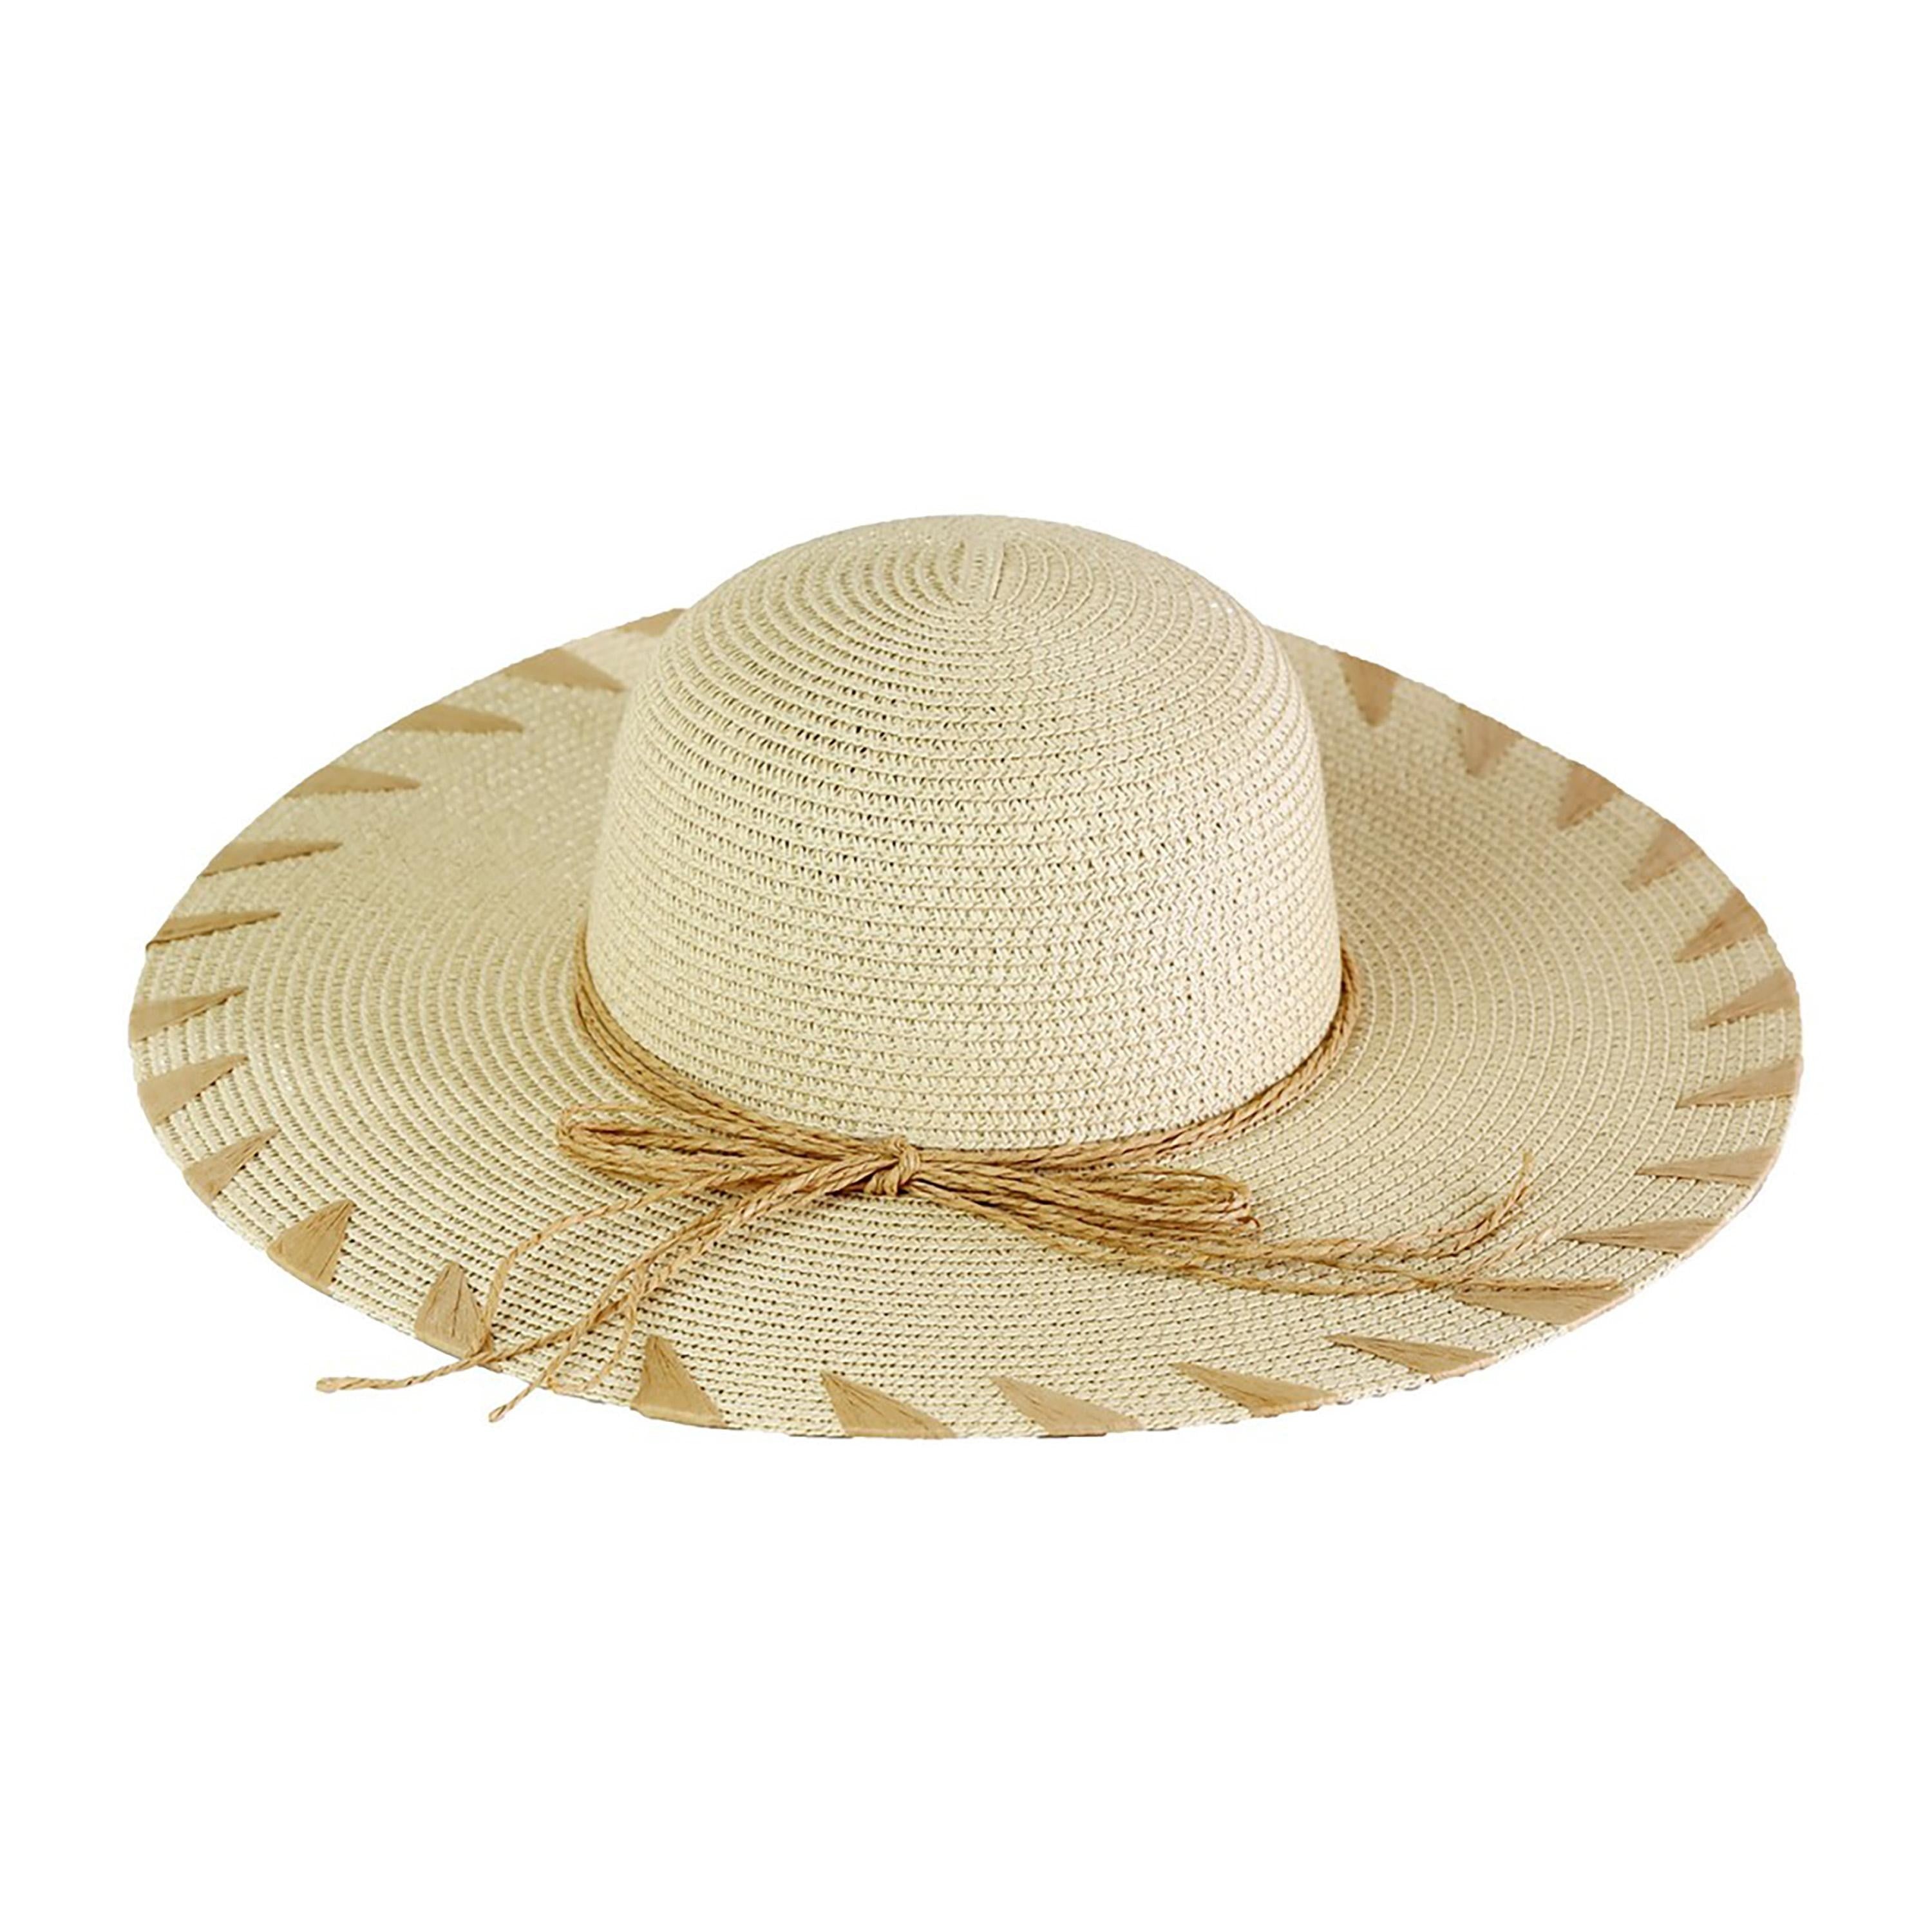 Shop Floppy Beach Hat with Edge Details-Hats at Ruby Joy Boutique, a Women's Clothing Store in Pickerington, Ohio